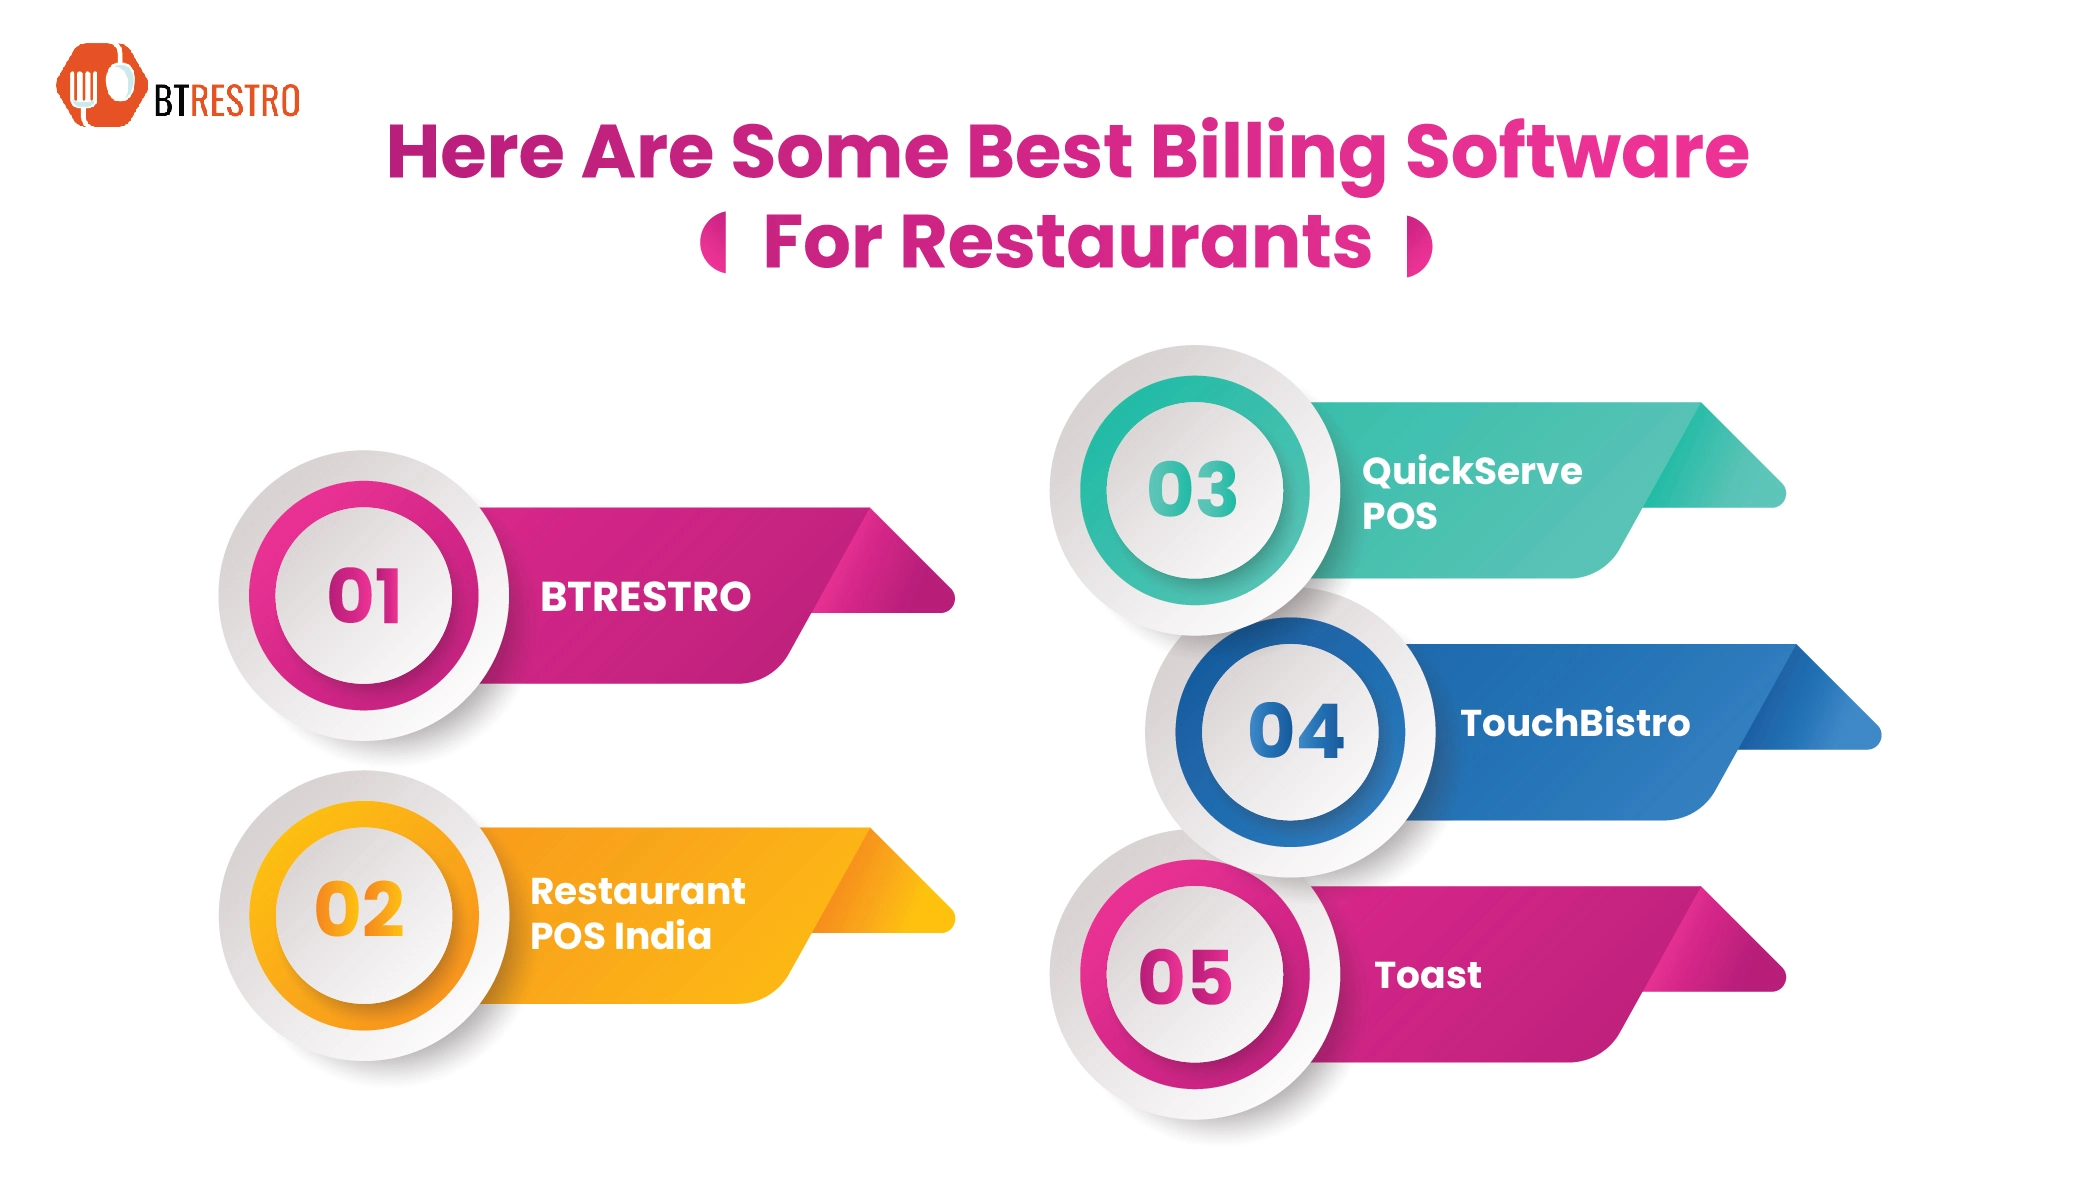 Here Are Some Best Billing Software For Restaurants